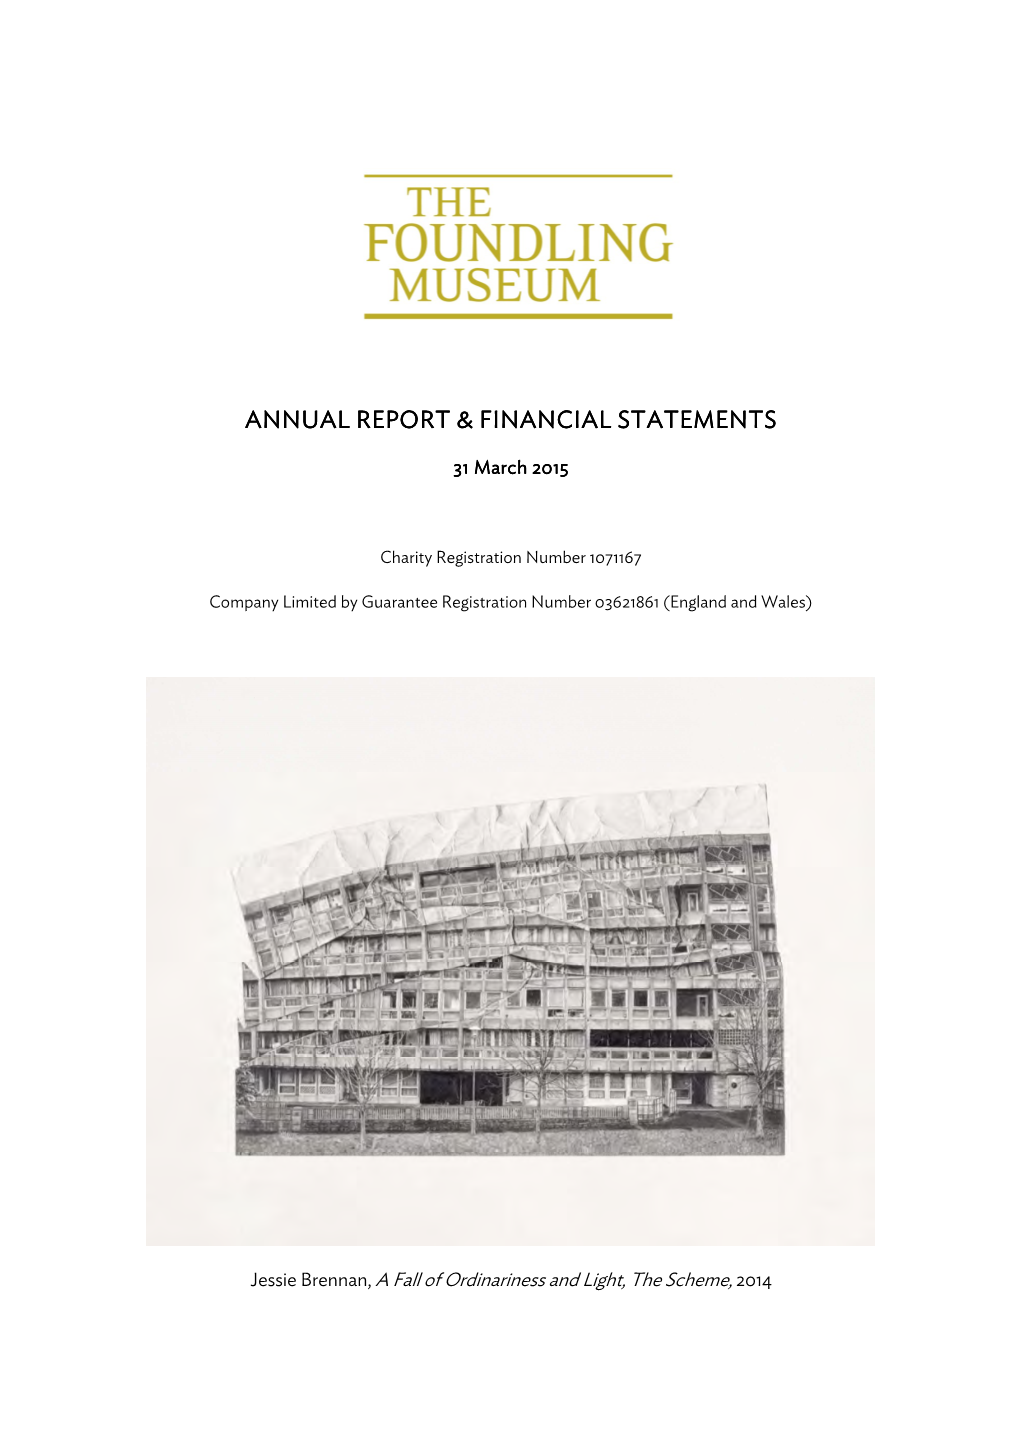 2015 Annual Report & Financial Statements